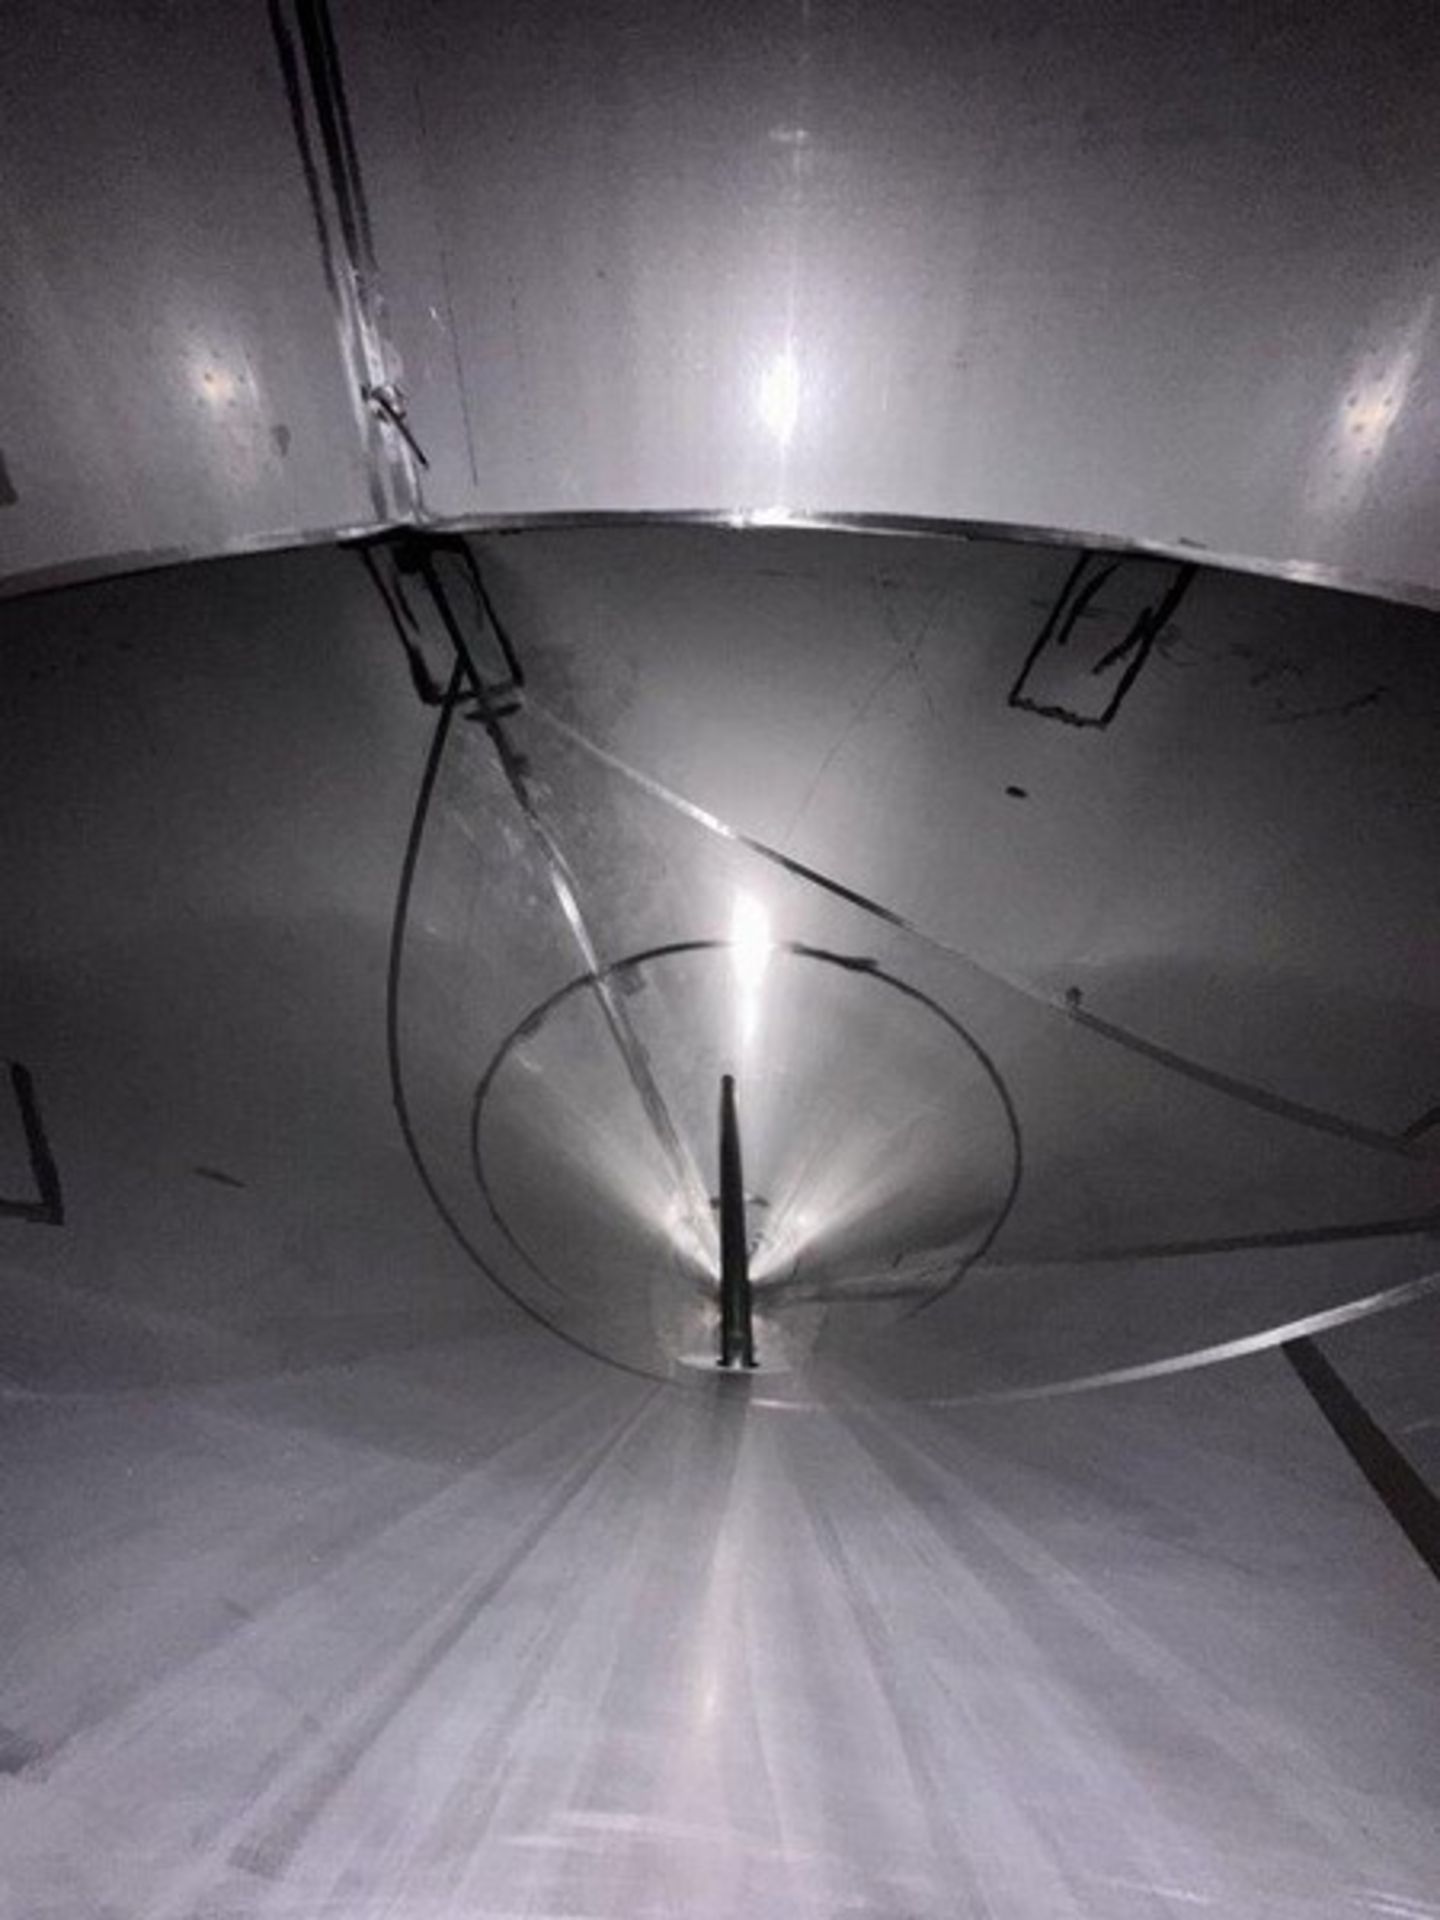 150 BBL (4650 Gallon) Vertical Cone Bottom 304 Stainless Steel Jacketed Vessel. Manufactured by San - Image 5 of 9